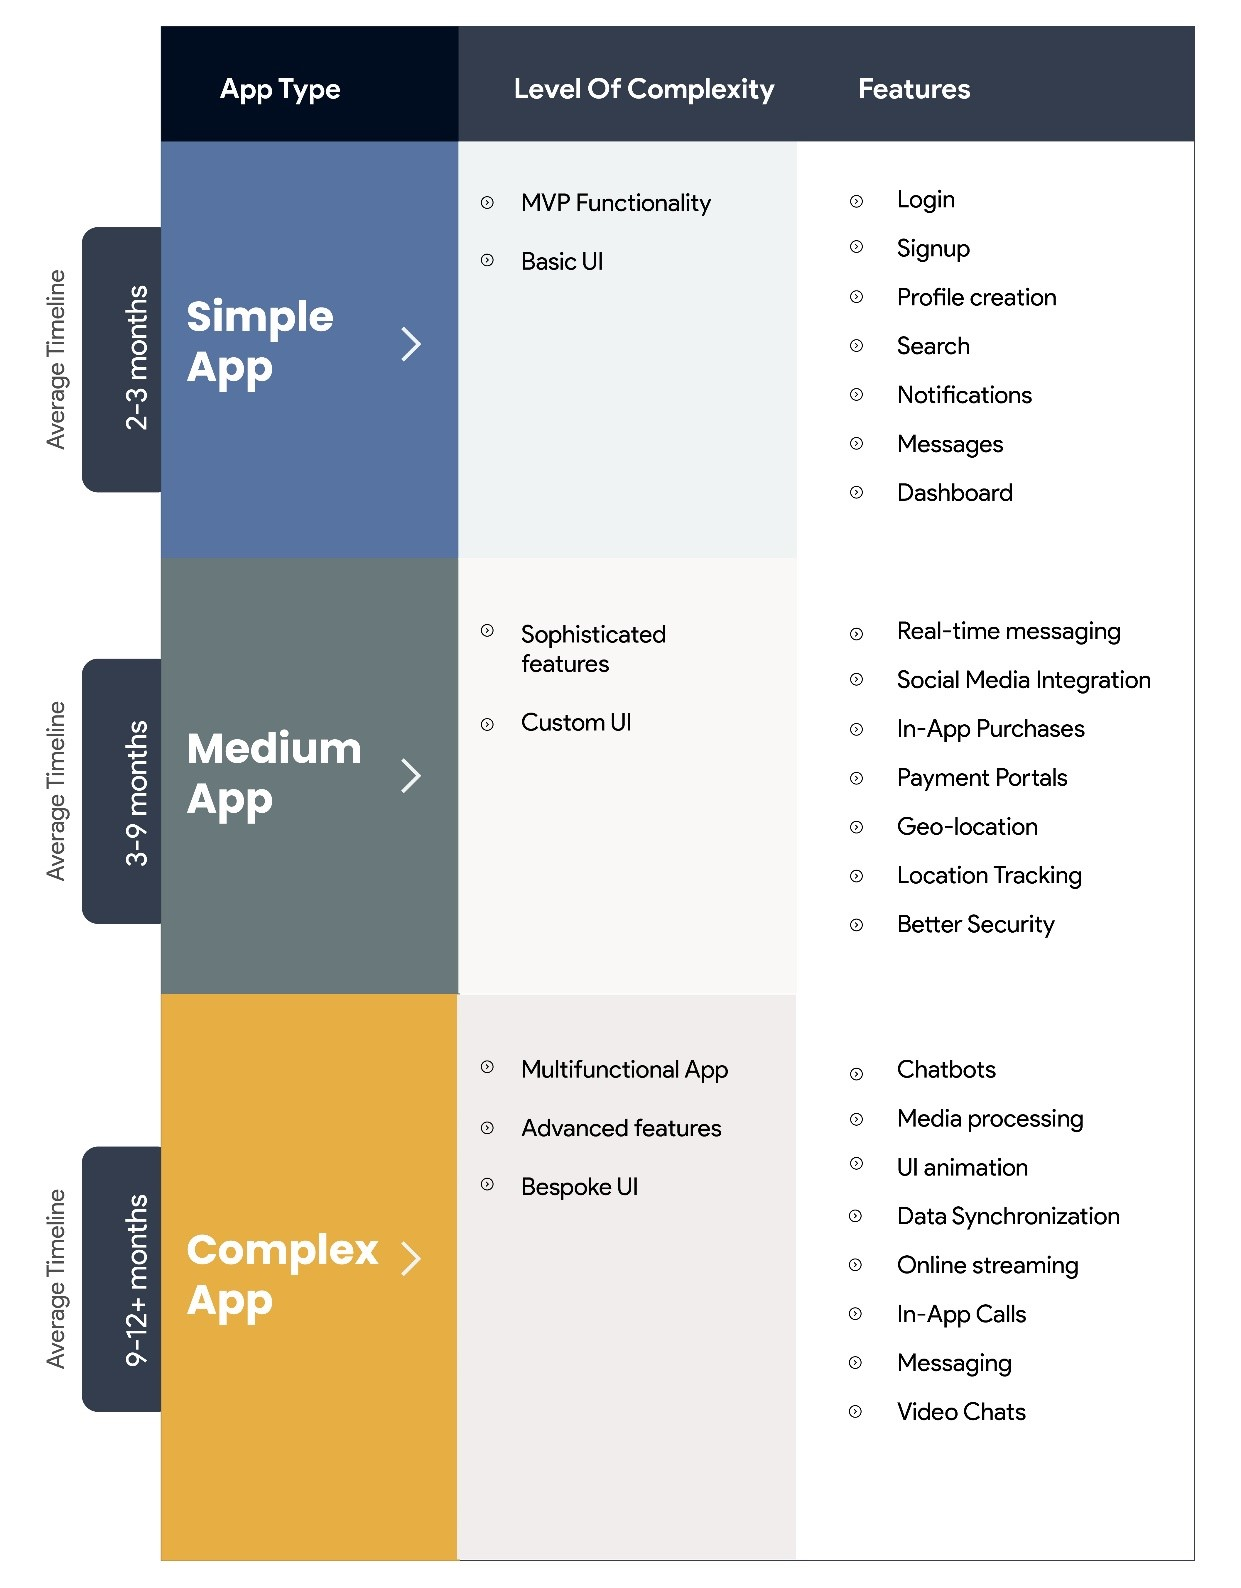 Application complexity chart